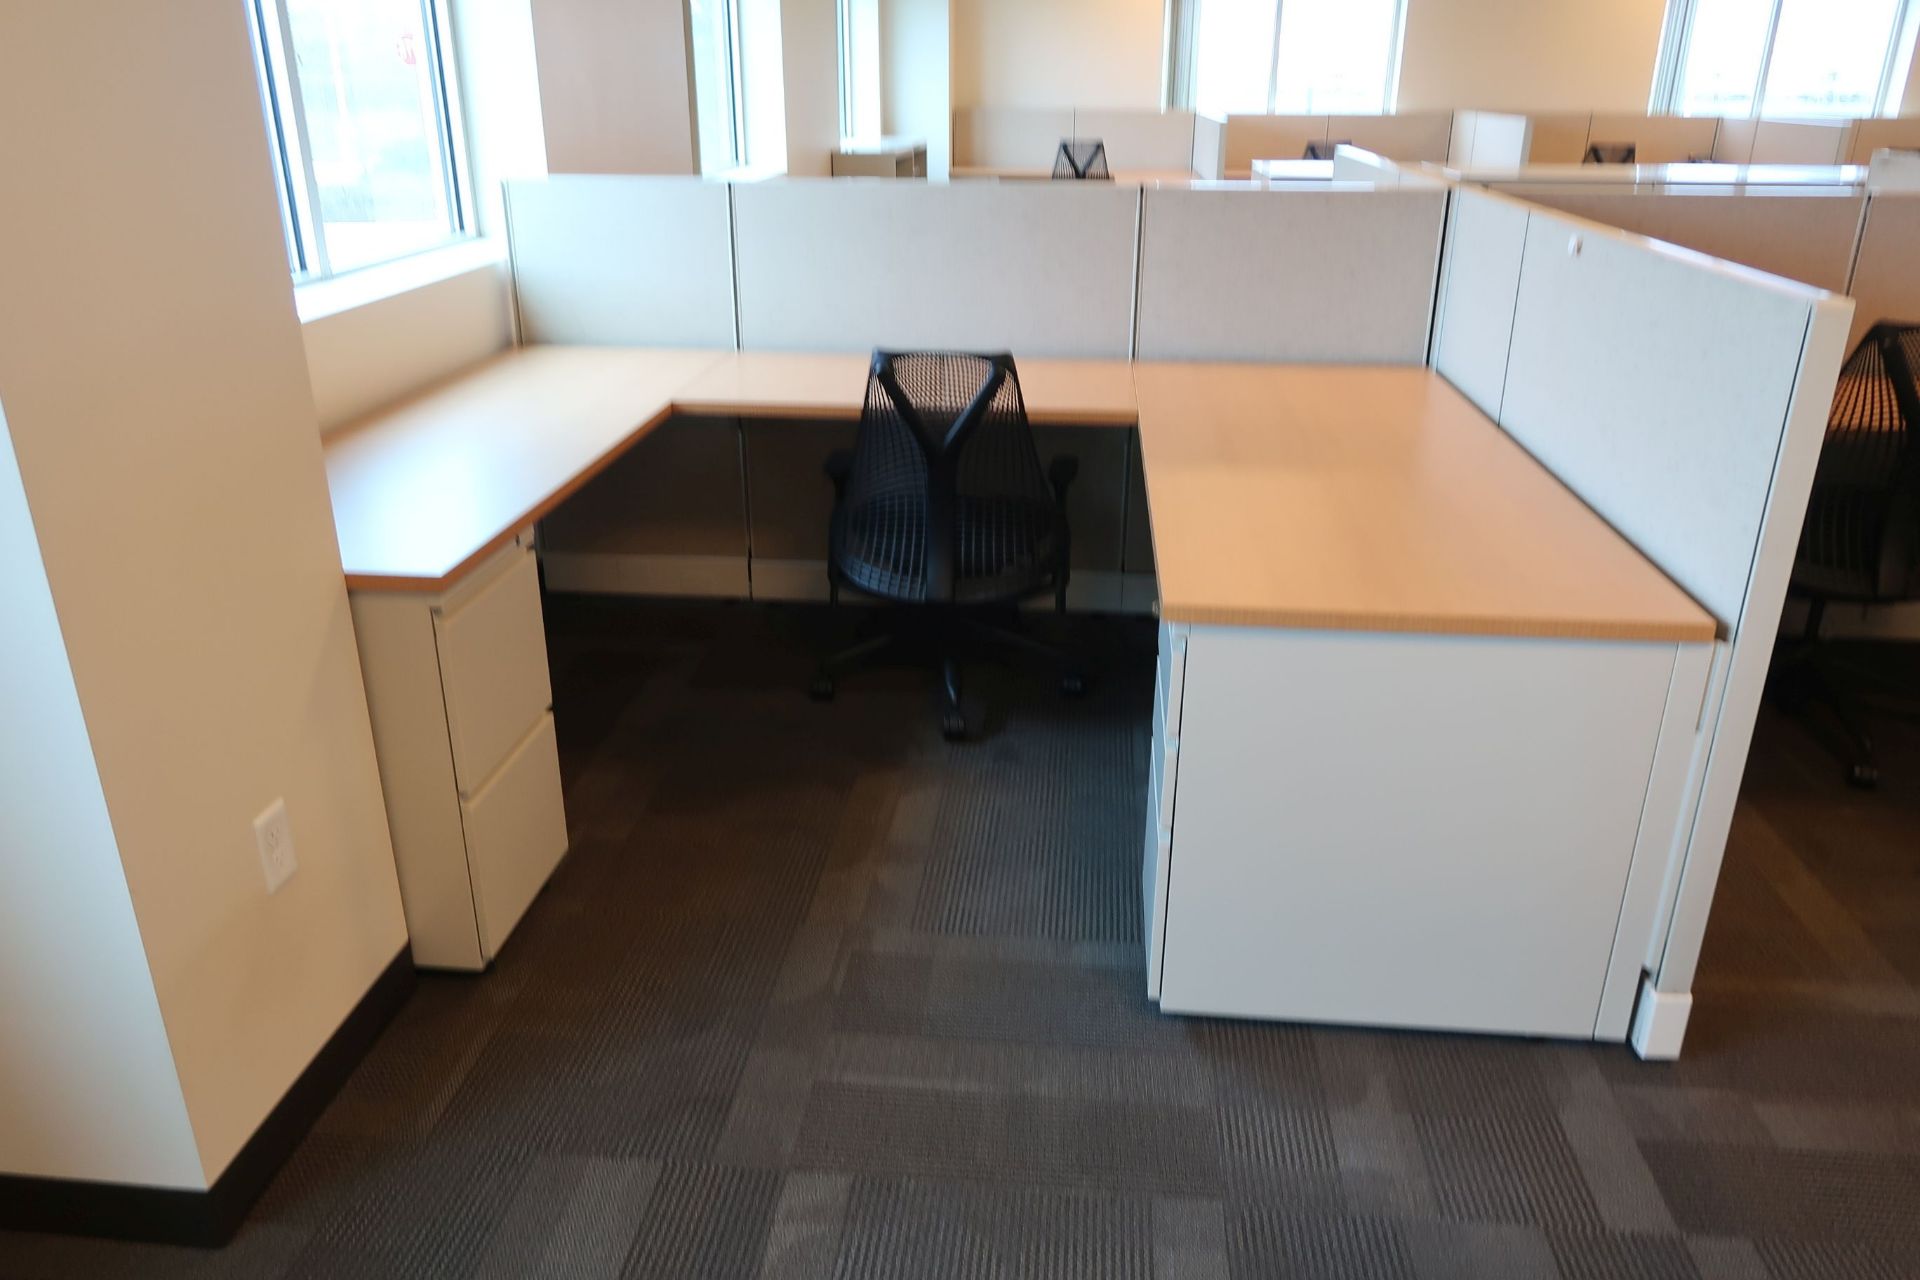 (LOT) 10-PERSON HERMAN MILLER CUBICLE SET 47" HIGH WALLS WITH CHAIRS - Image 6 of 11